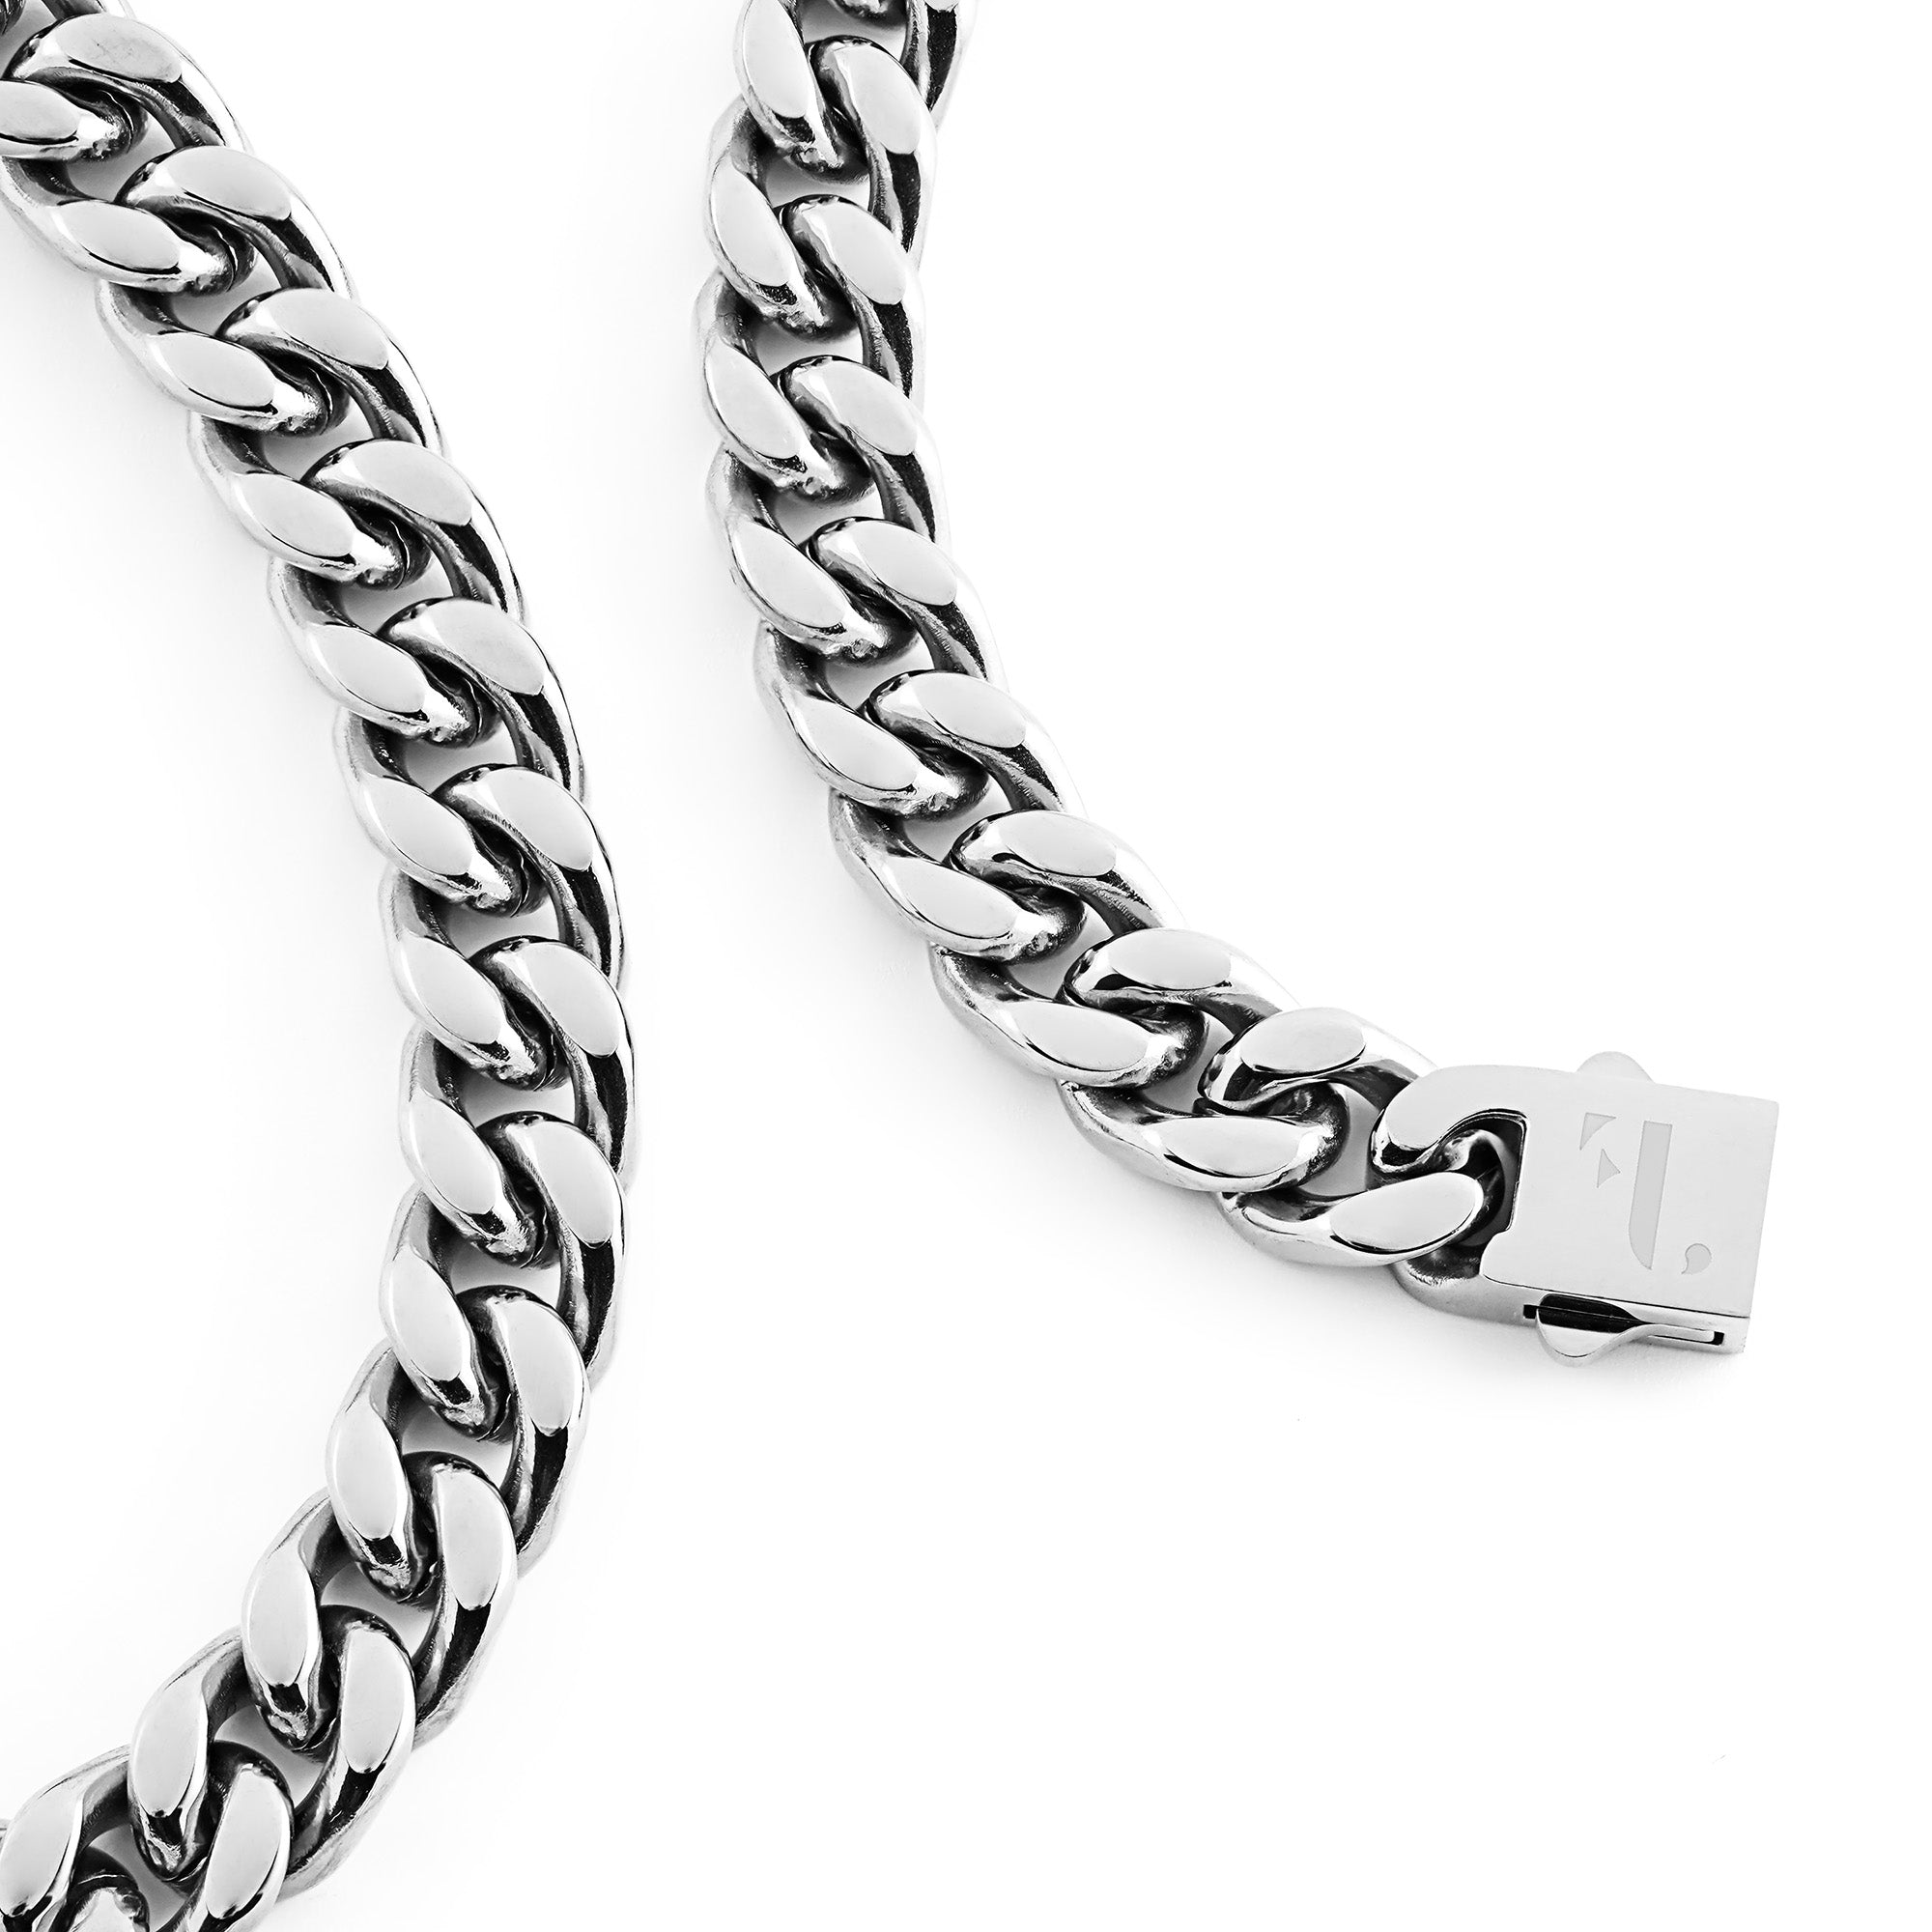 Cass women's necklace by Five Jwlry, designed with a 10mm tightly woven Cuban link chain in a silver hue, crafted from water-resistant 316L stainless steel. Available in sizes 40cm, 45cm and 50cm. Hypoallergenic and accompanied by a 2-year warranty.